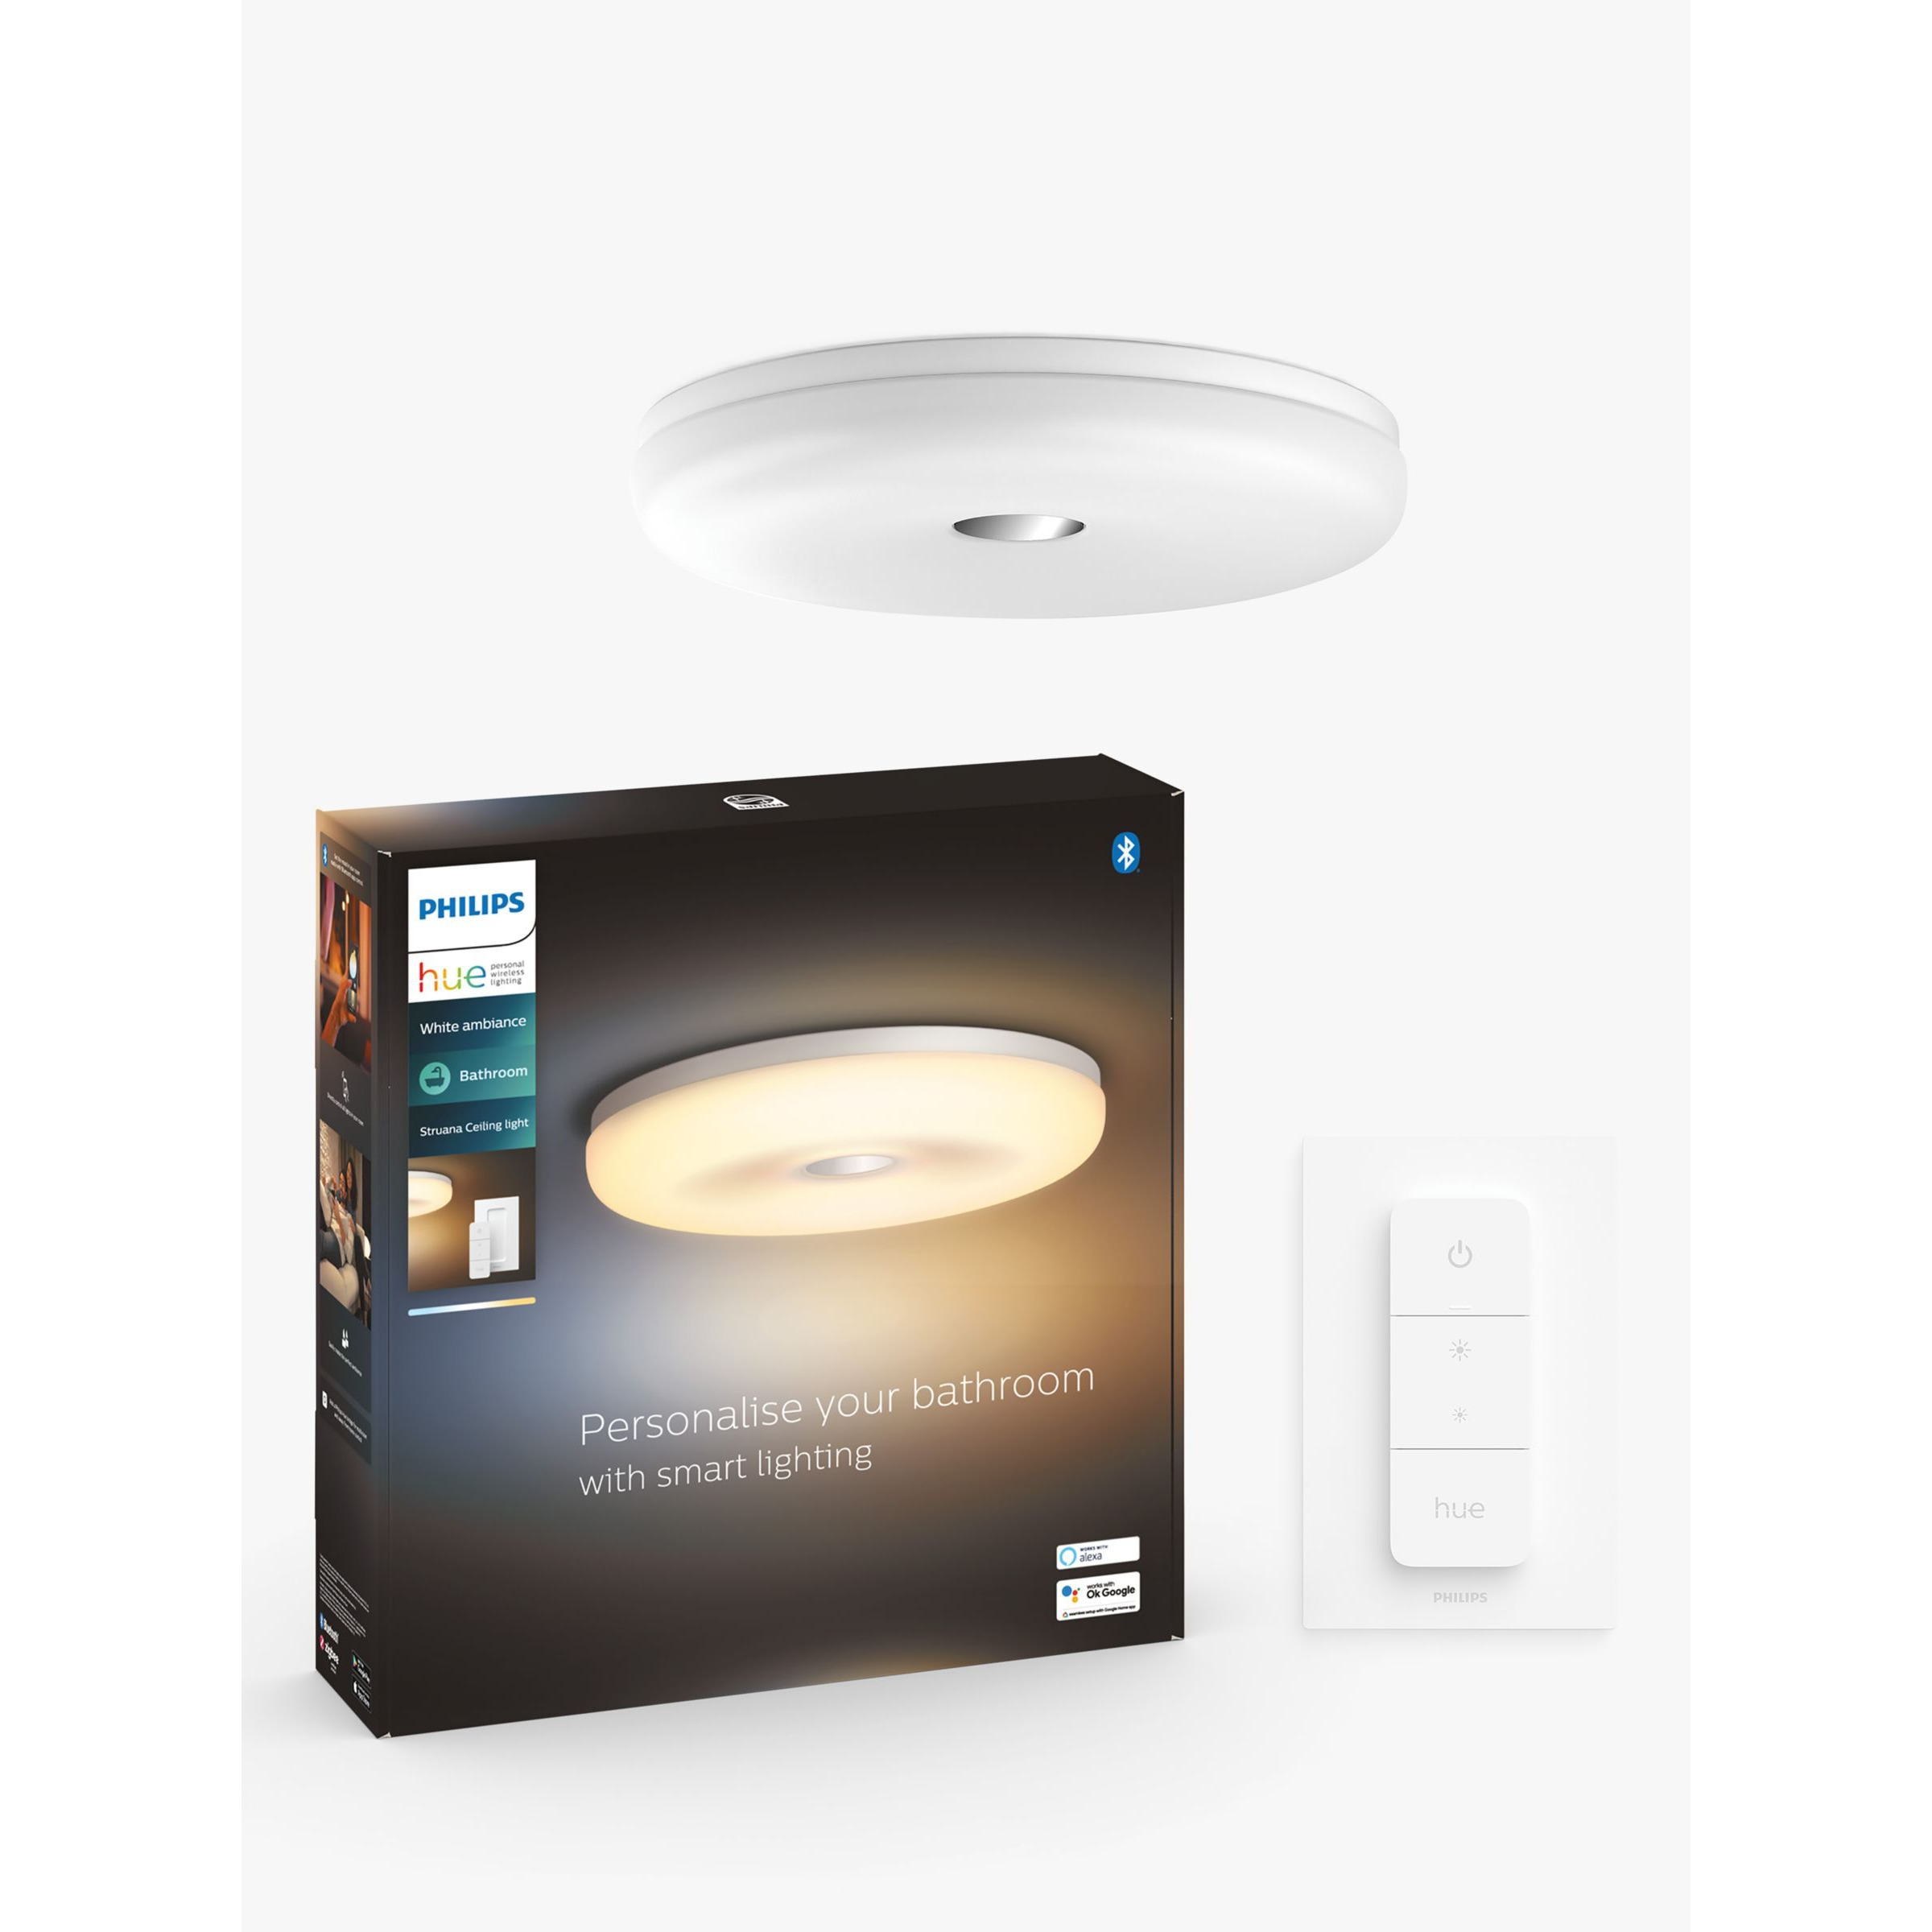 Philips Hue White Ambiance Struana LED Smart Flush Bathroom Ceiling Light with Bluetooth and Dimmer Switch, White - image 1